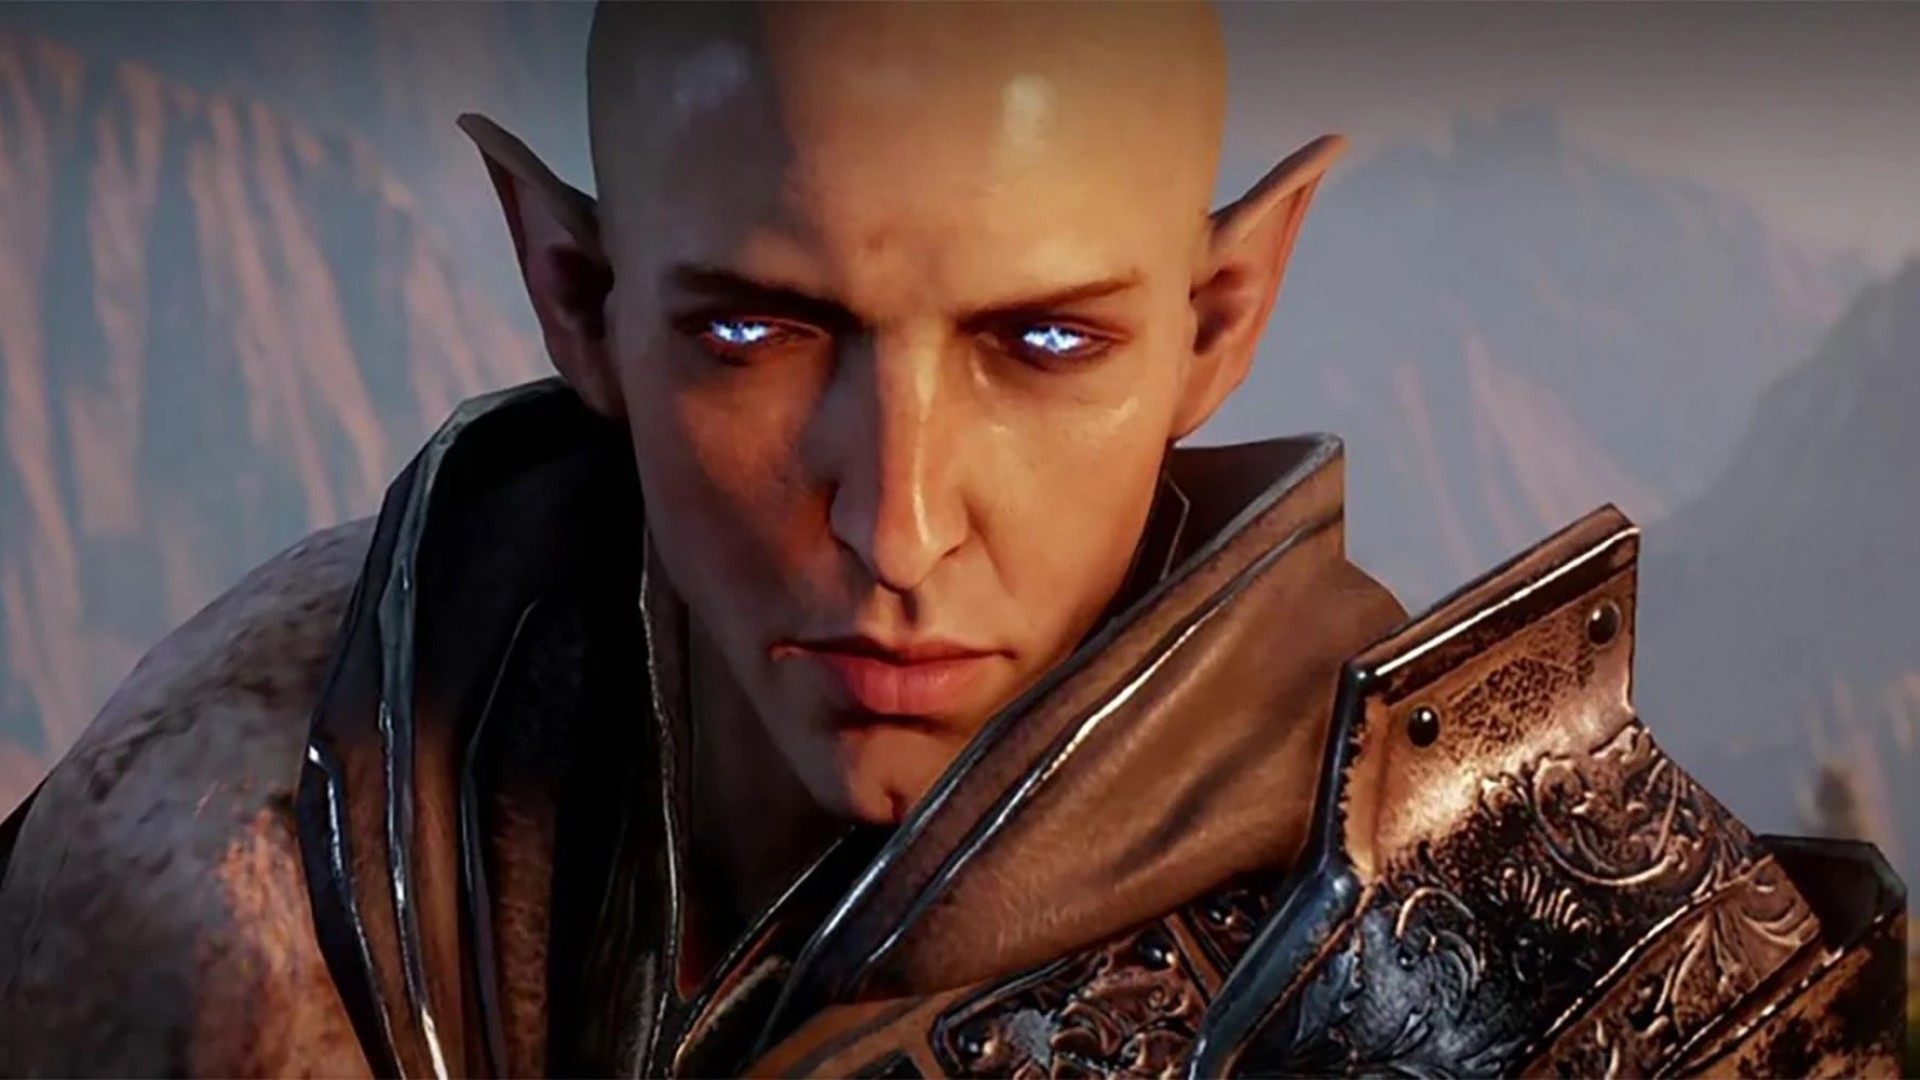 Dragon Age 4's full title has been revealed